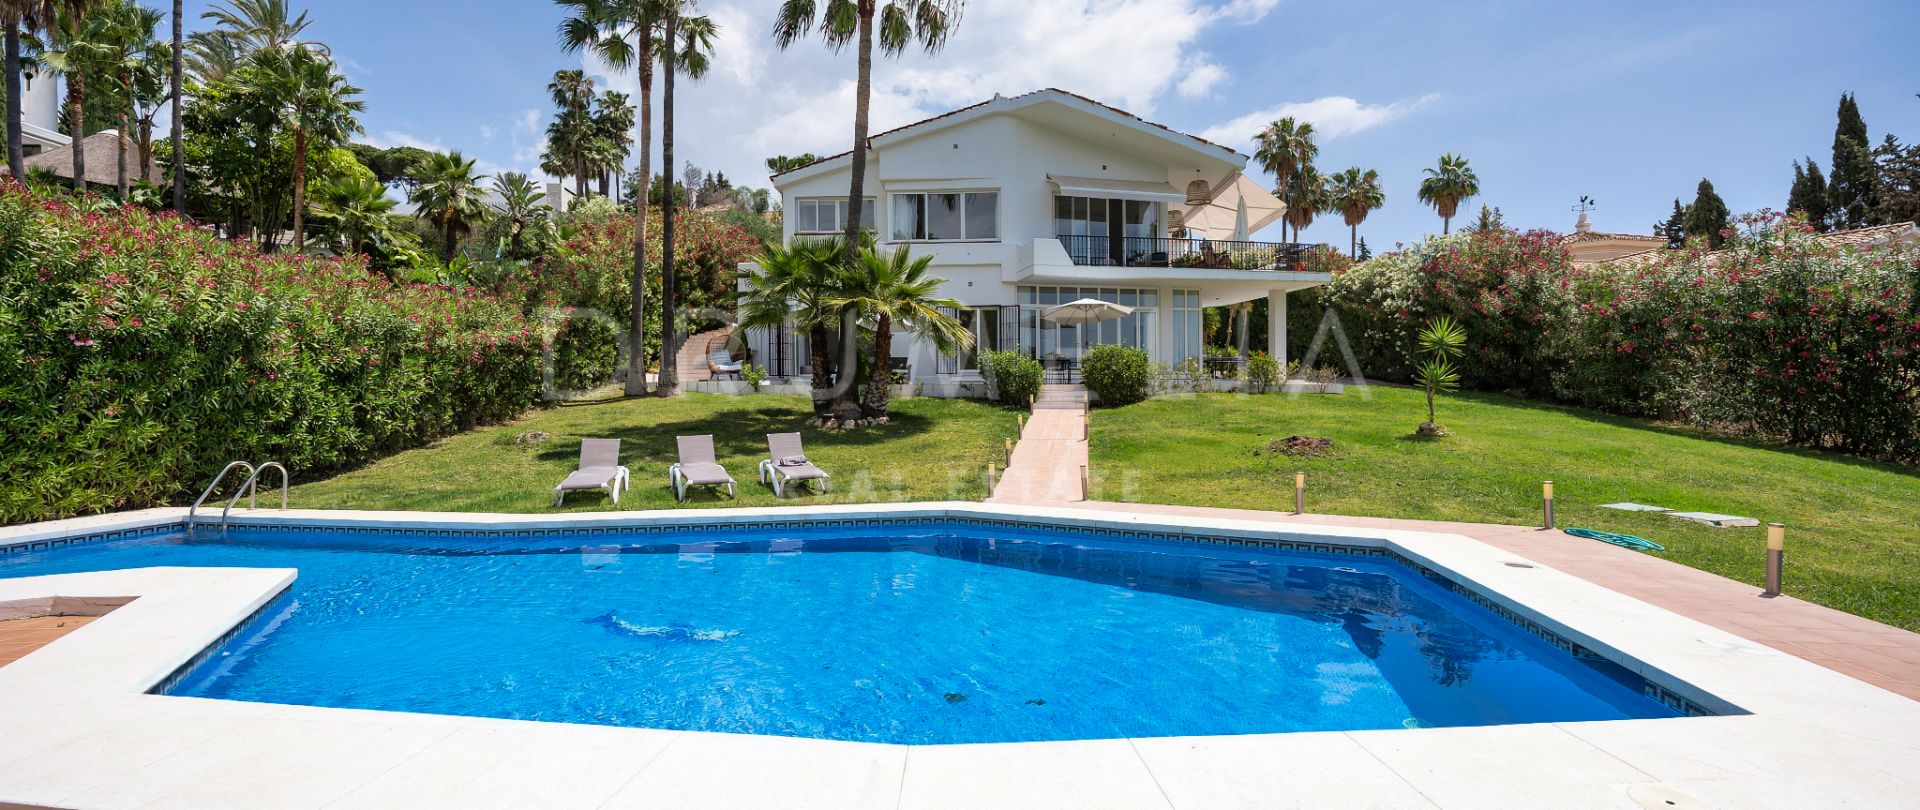 Front-line golf luxury villa with Scandinavian-style design and lots of potential, Nueva Andalucia